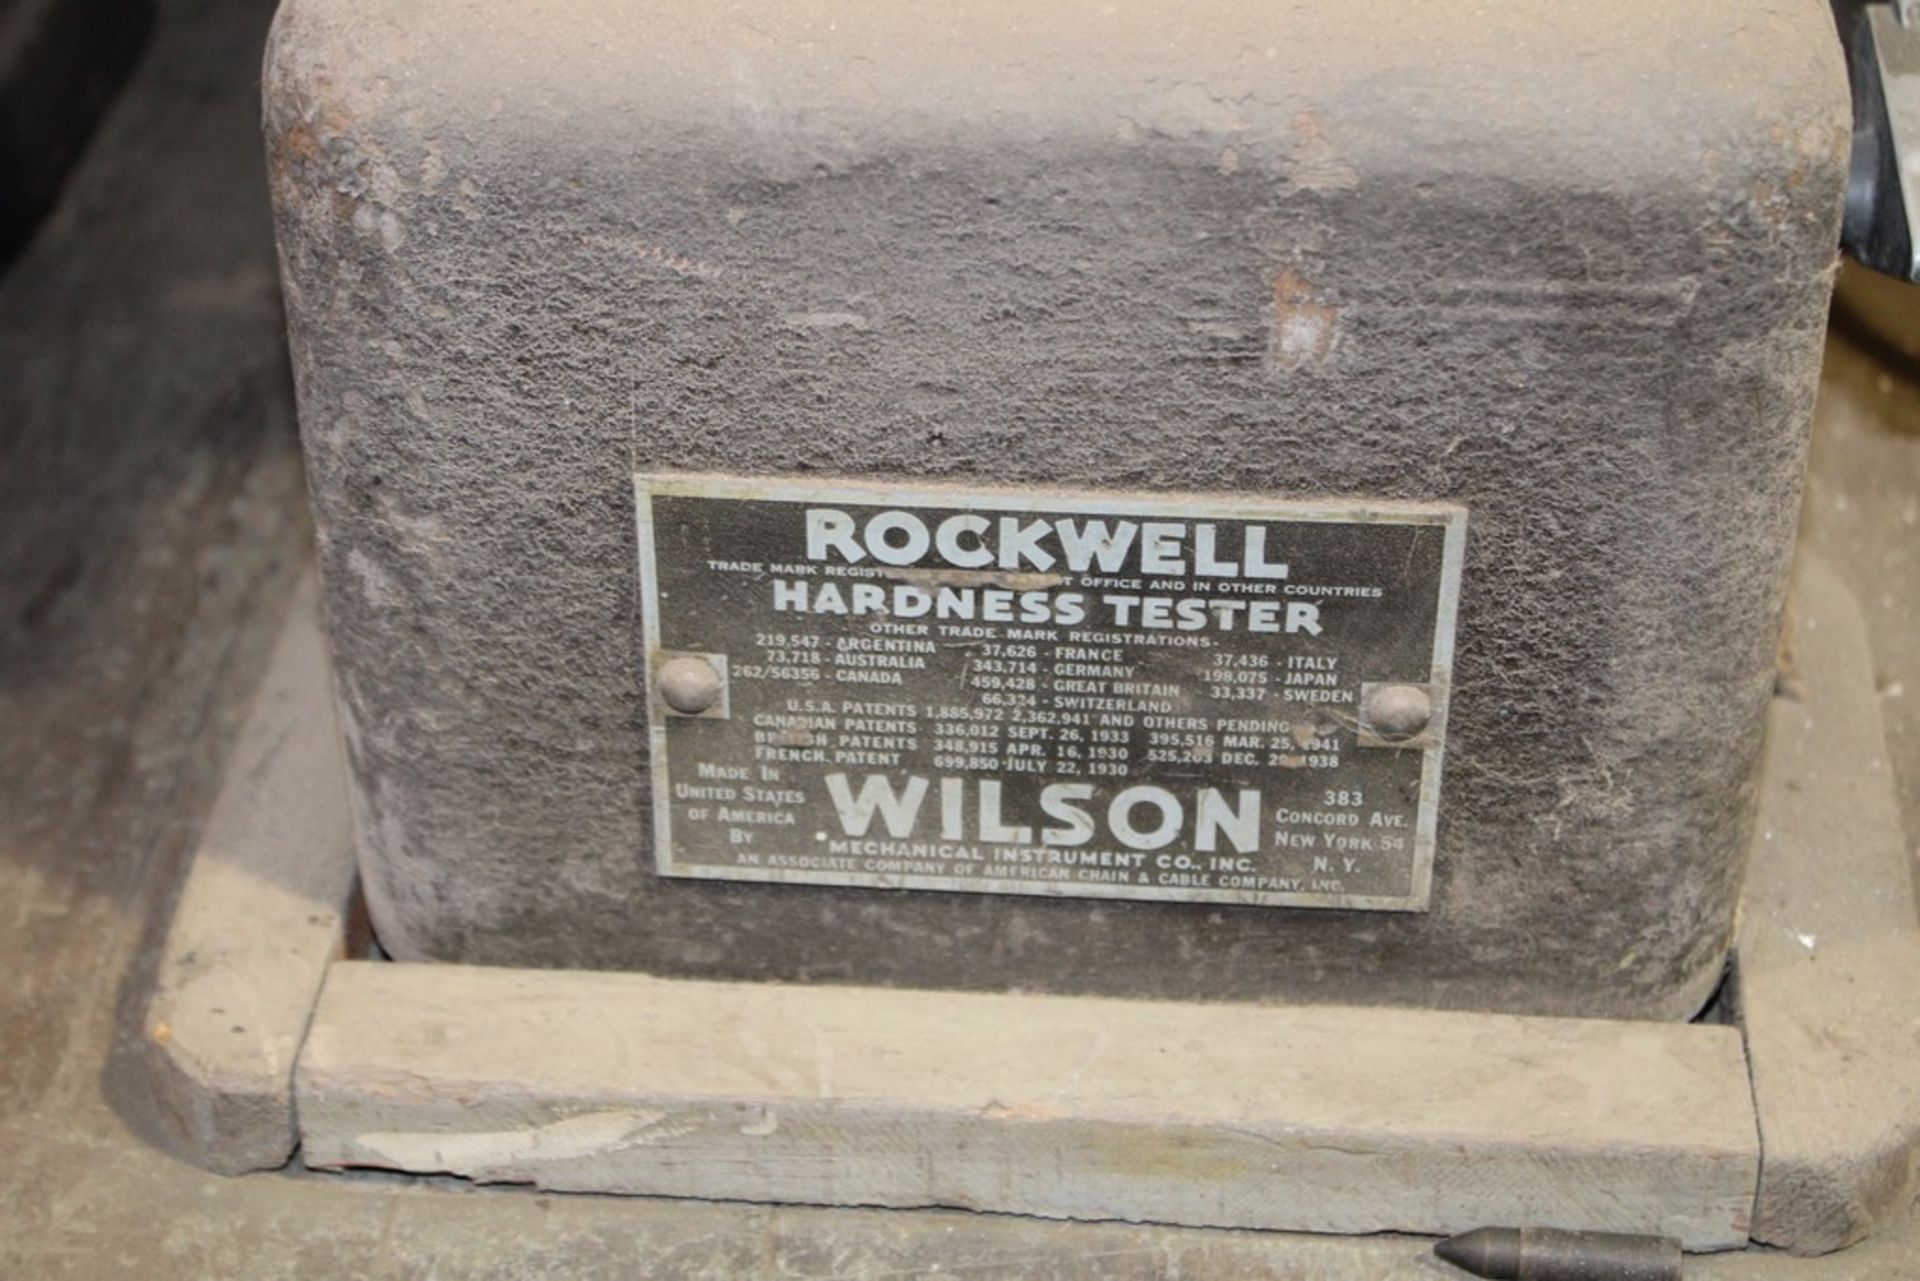 WILSON MODEL 3JR ROCKWELL HARDNESS TESTER, S/N 3JR3930, WITH BENCH & ACCESSORIES - Image 2 of 3